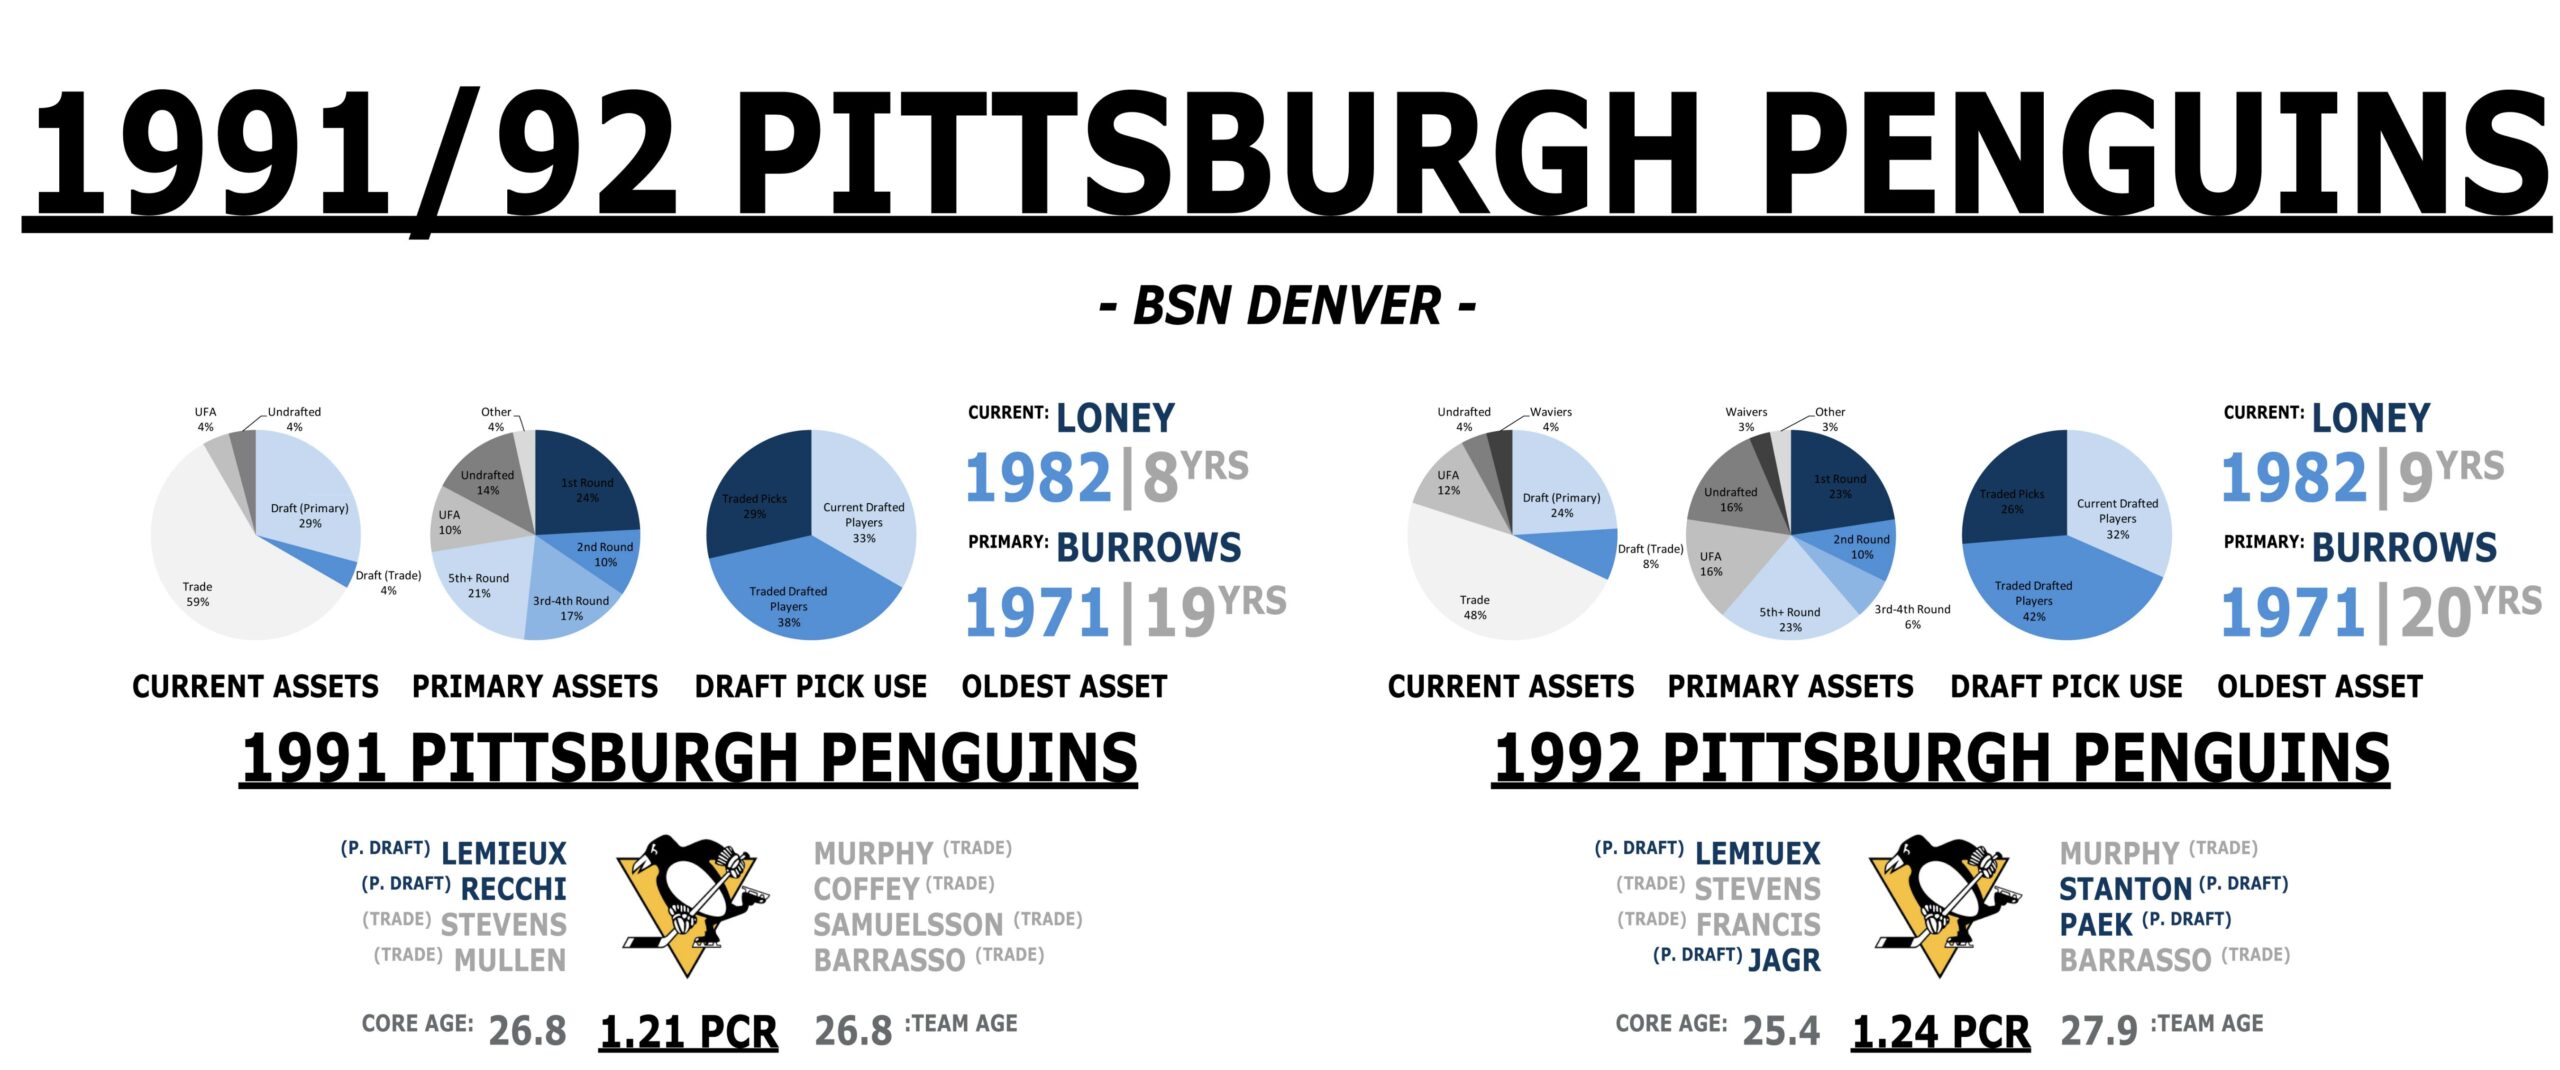 91-92 PIT Overview